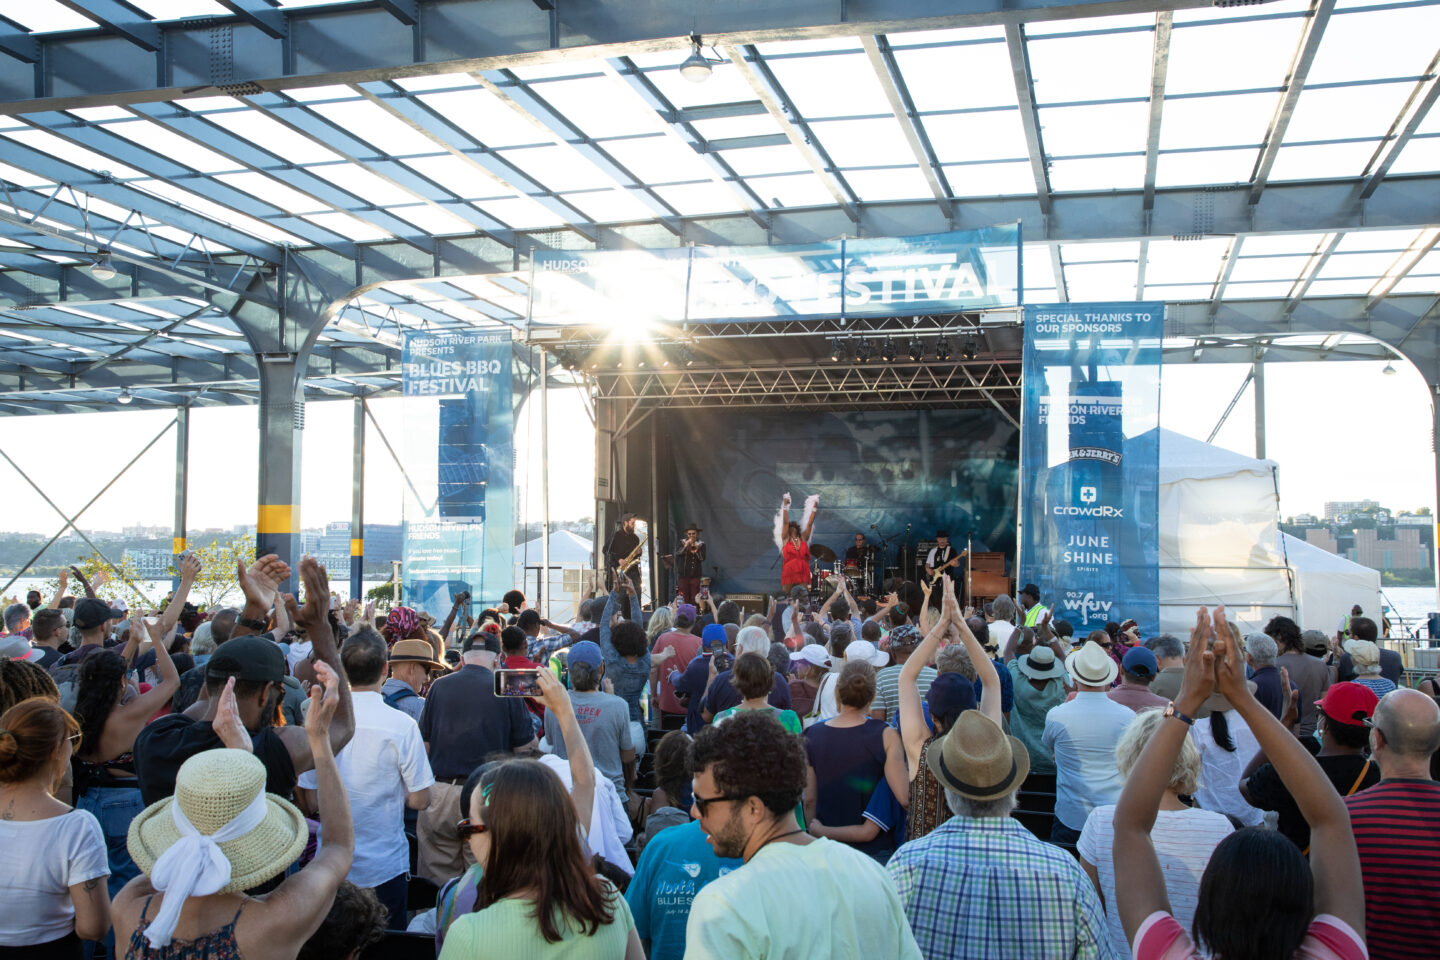 Blues BBQ crowd cheers on performer at Pier 76